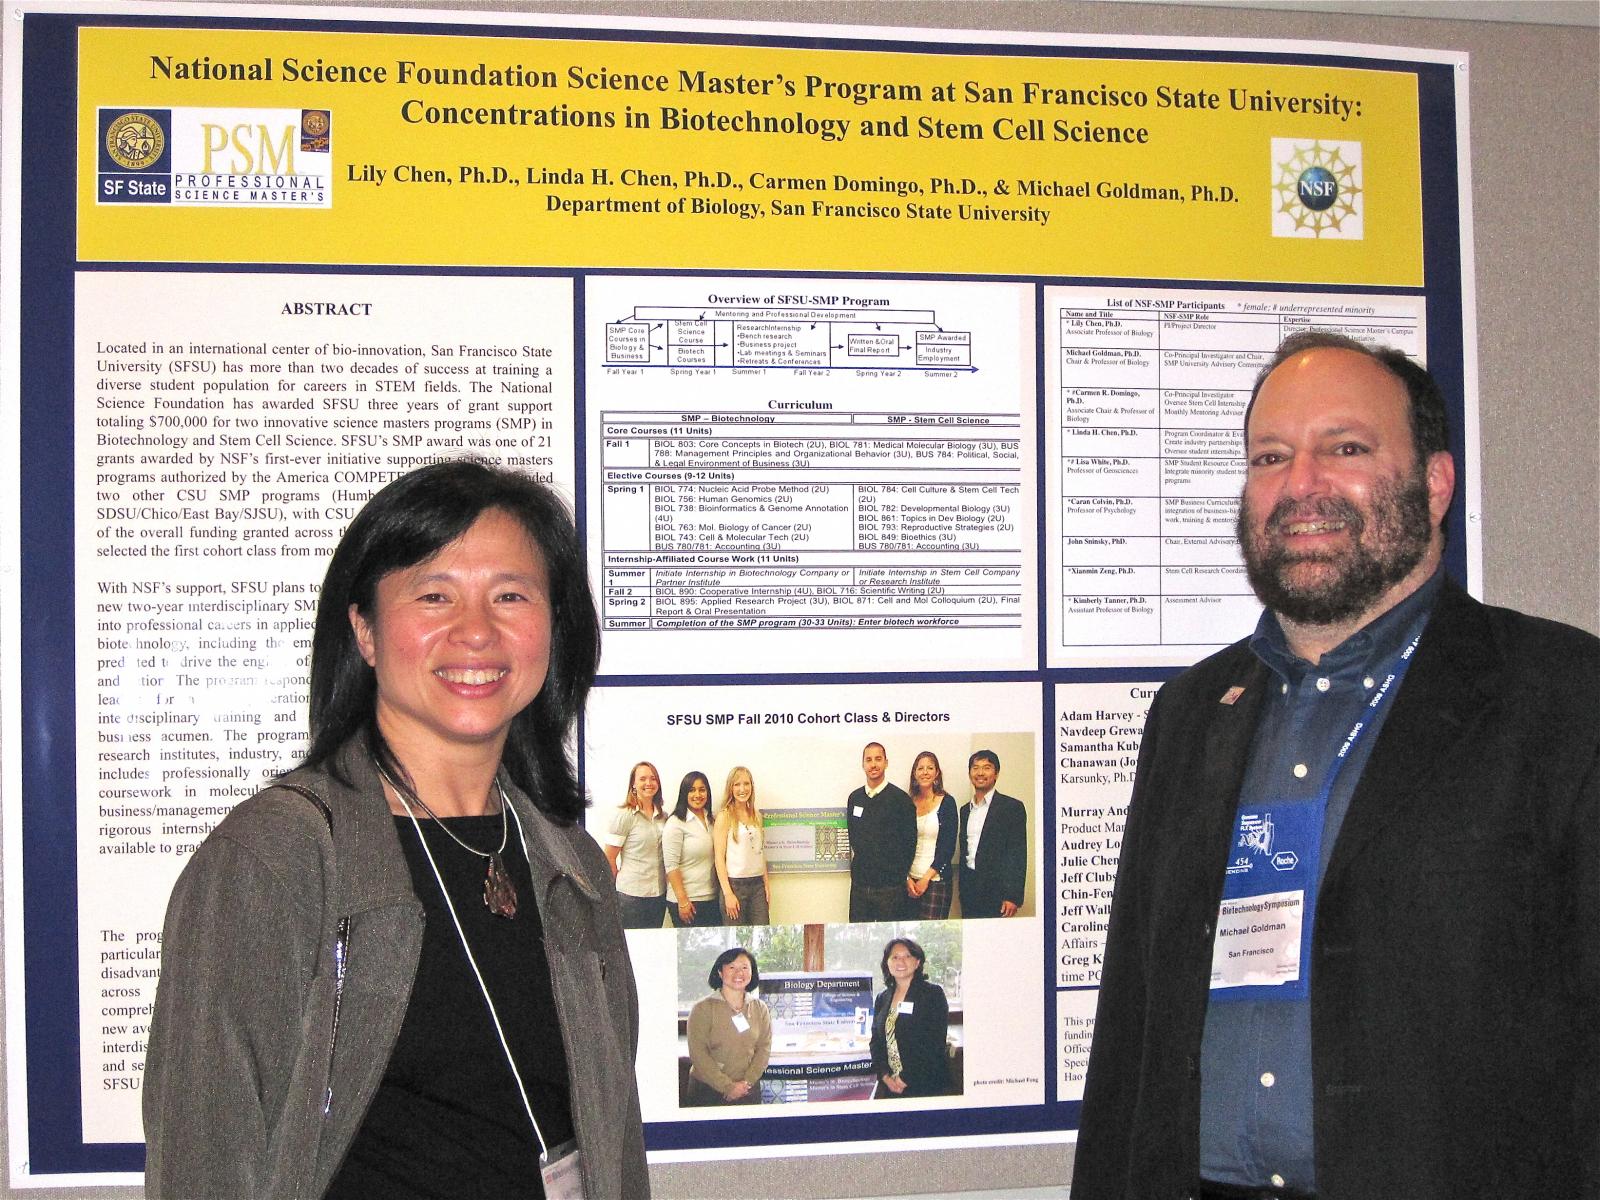 Lily Chen, Ph.D. and Michael Goldman, Ph.D. in 2010